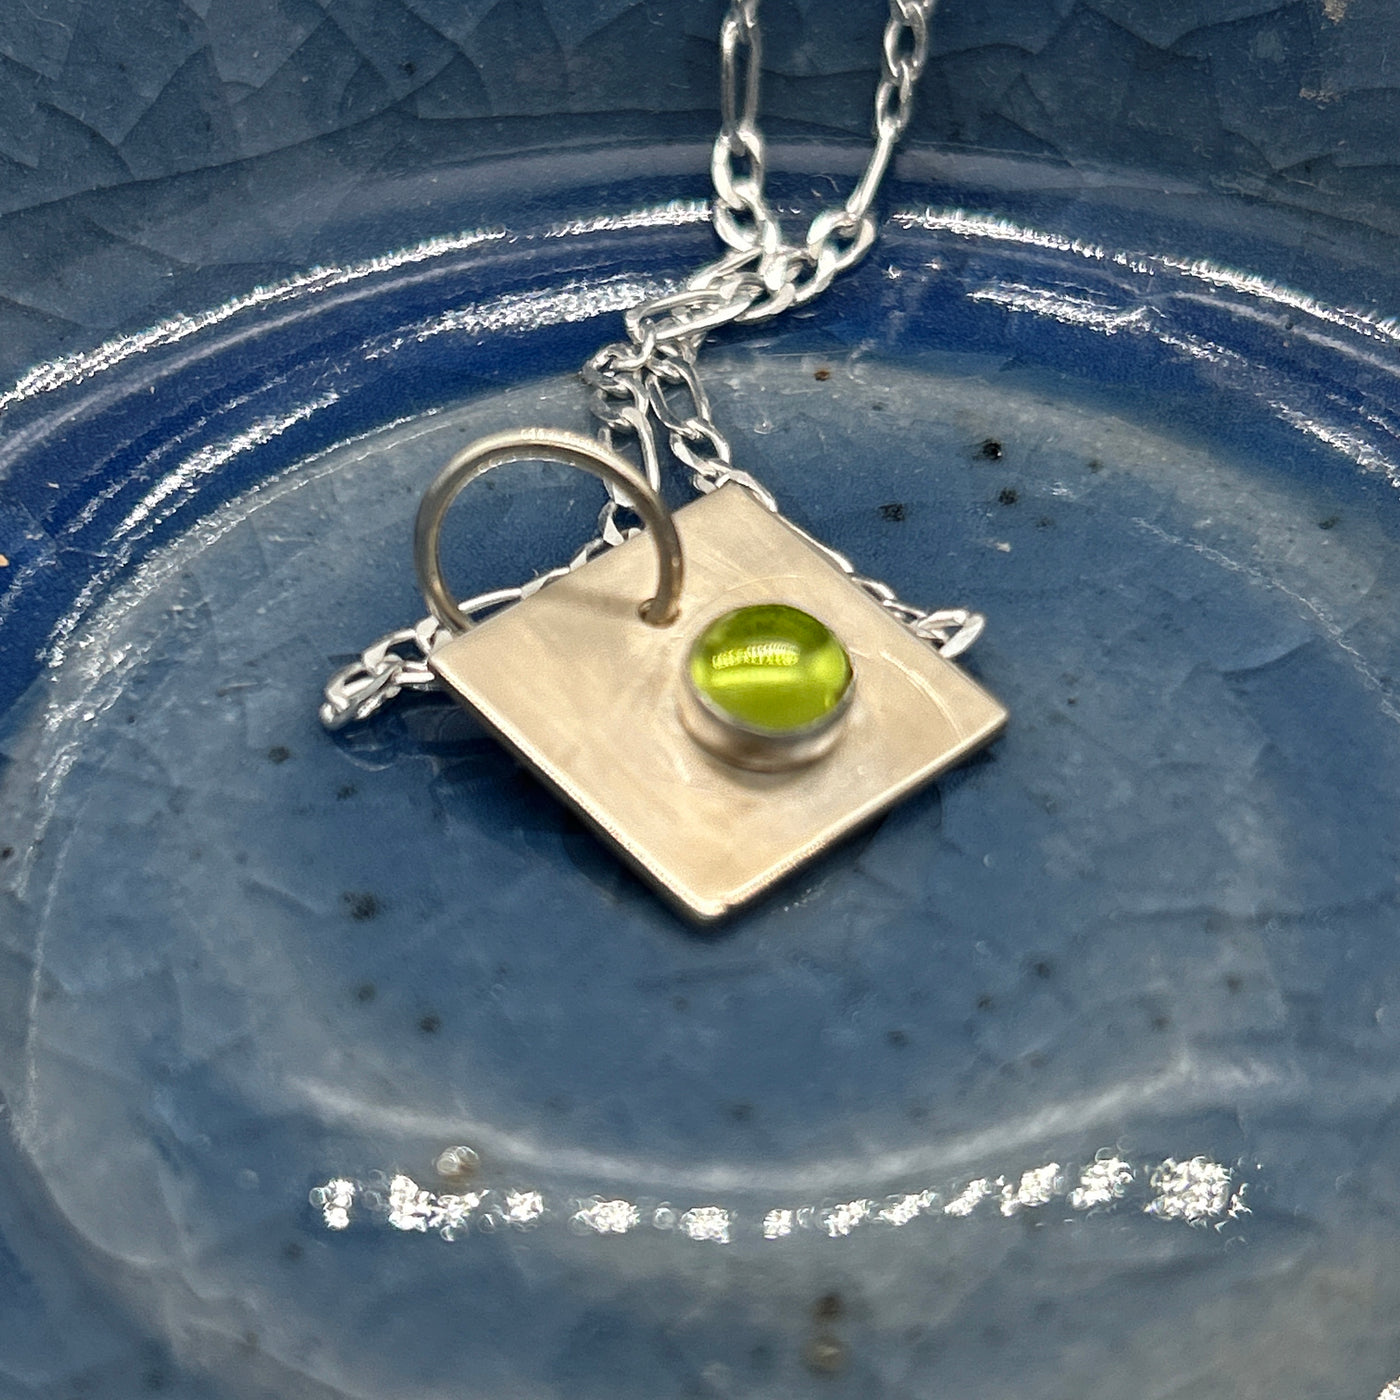 Peridot cabochon 6 mm on silver square pendant mounted on silver chain